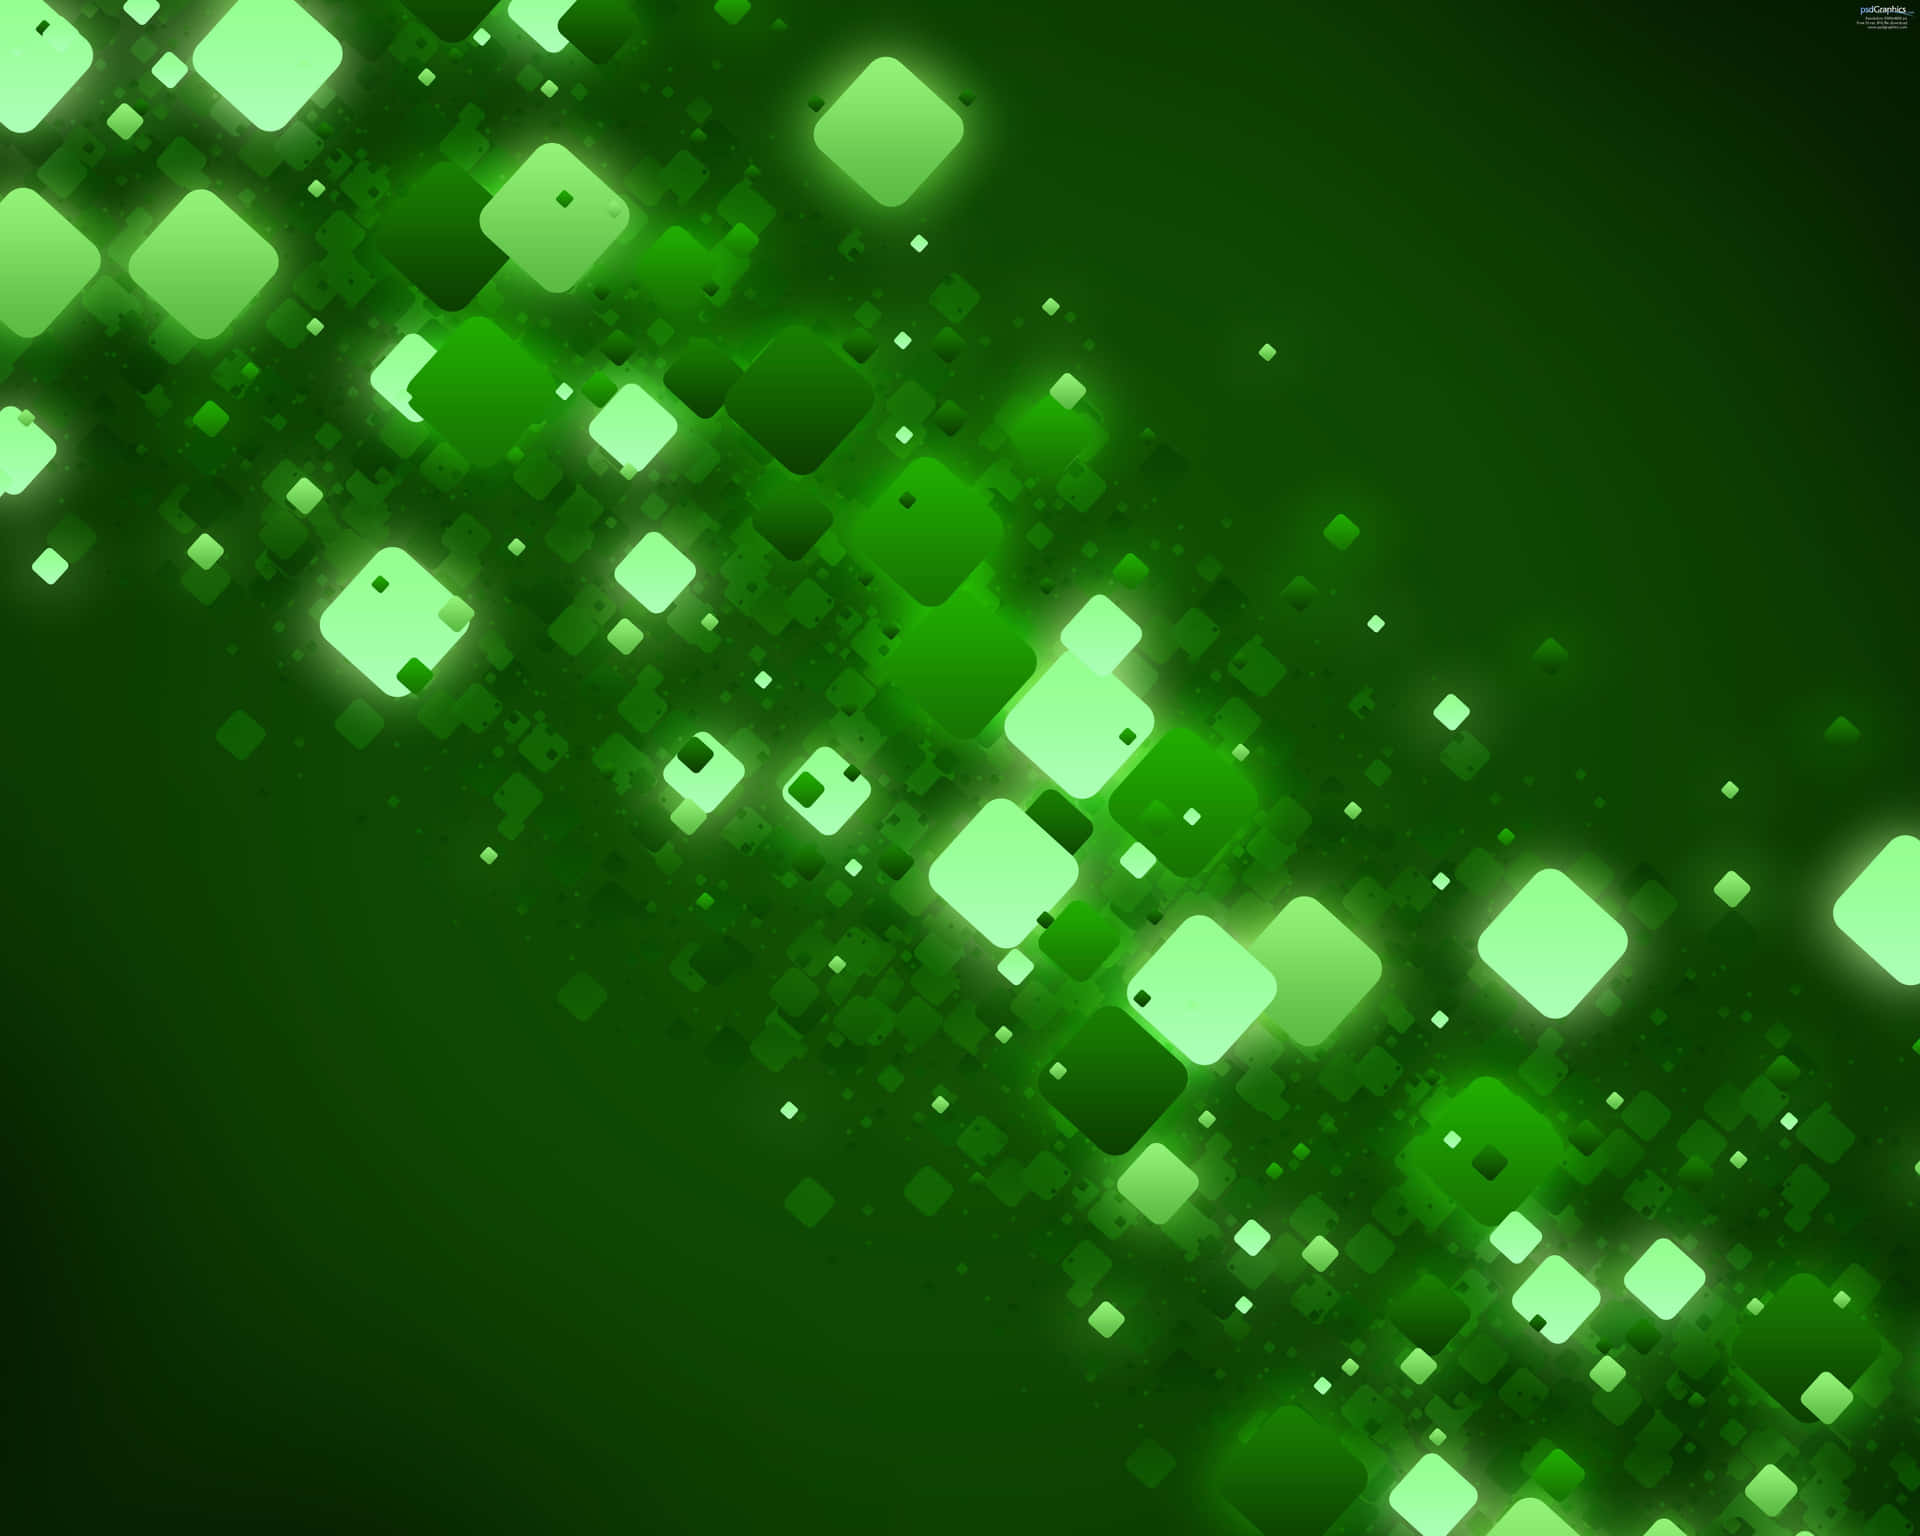 Green Squares On A Dark Background Wallpaper